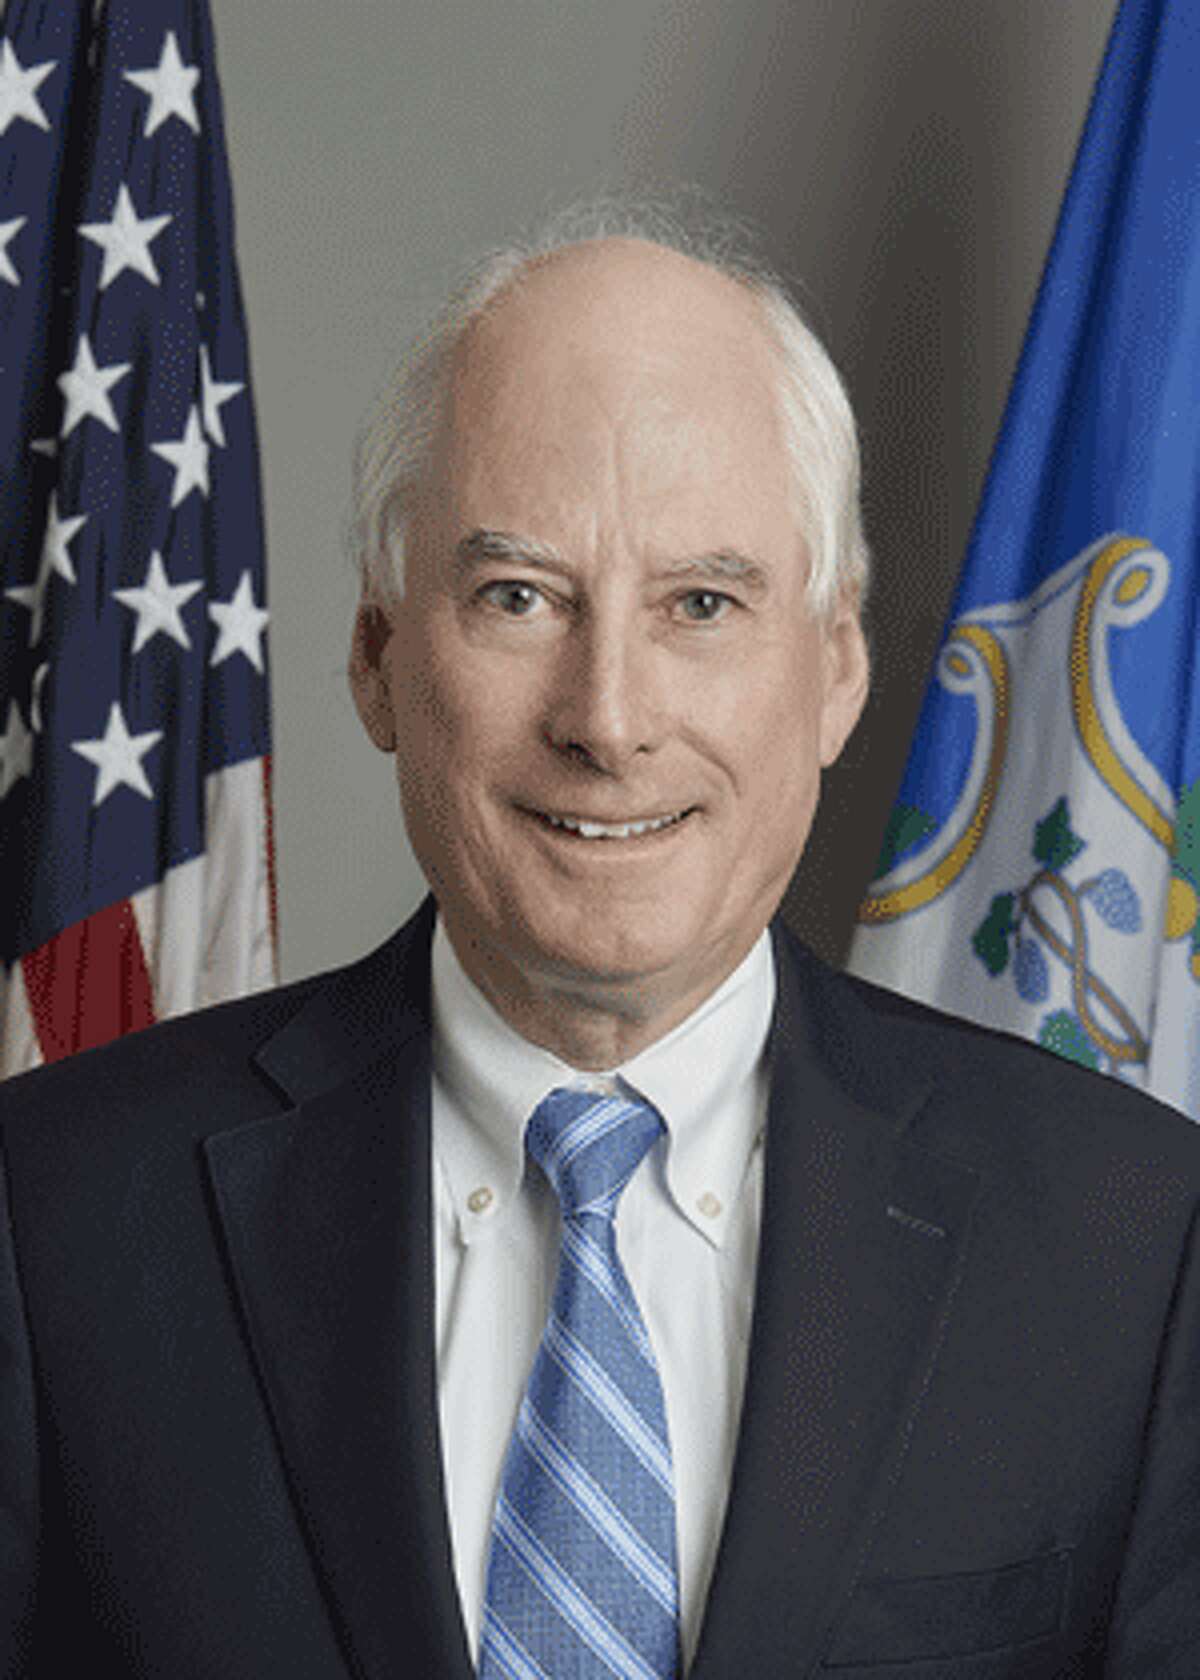 Pictured: Inspector General Robert J. Devlin Jr. The Connecticut Office of Inspector General revealed in its first annual report Monday it is investigating seven officer-involved shootings and 15 in-custody deaths.